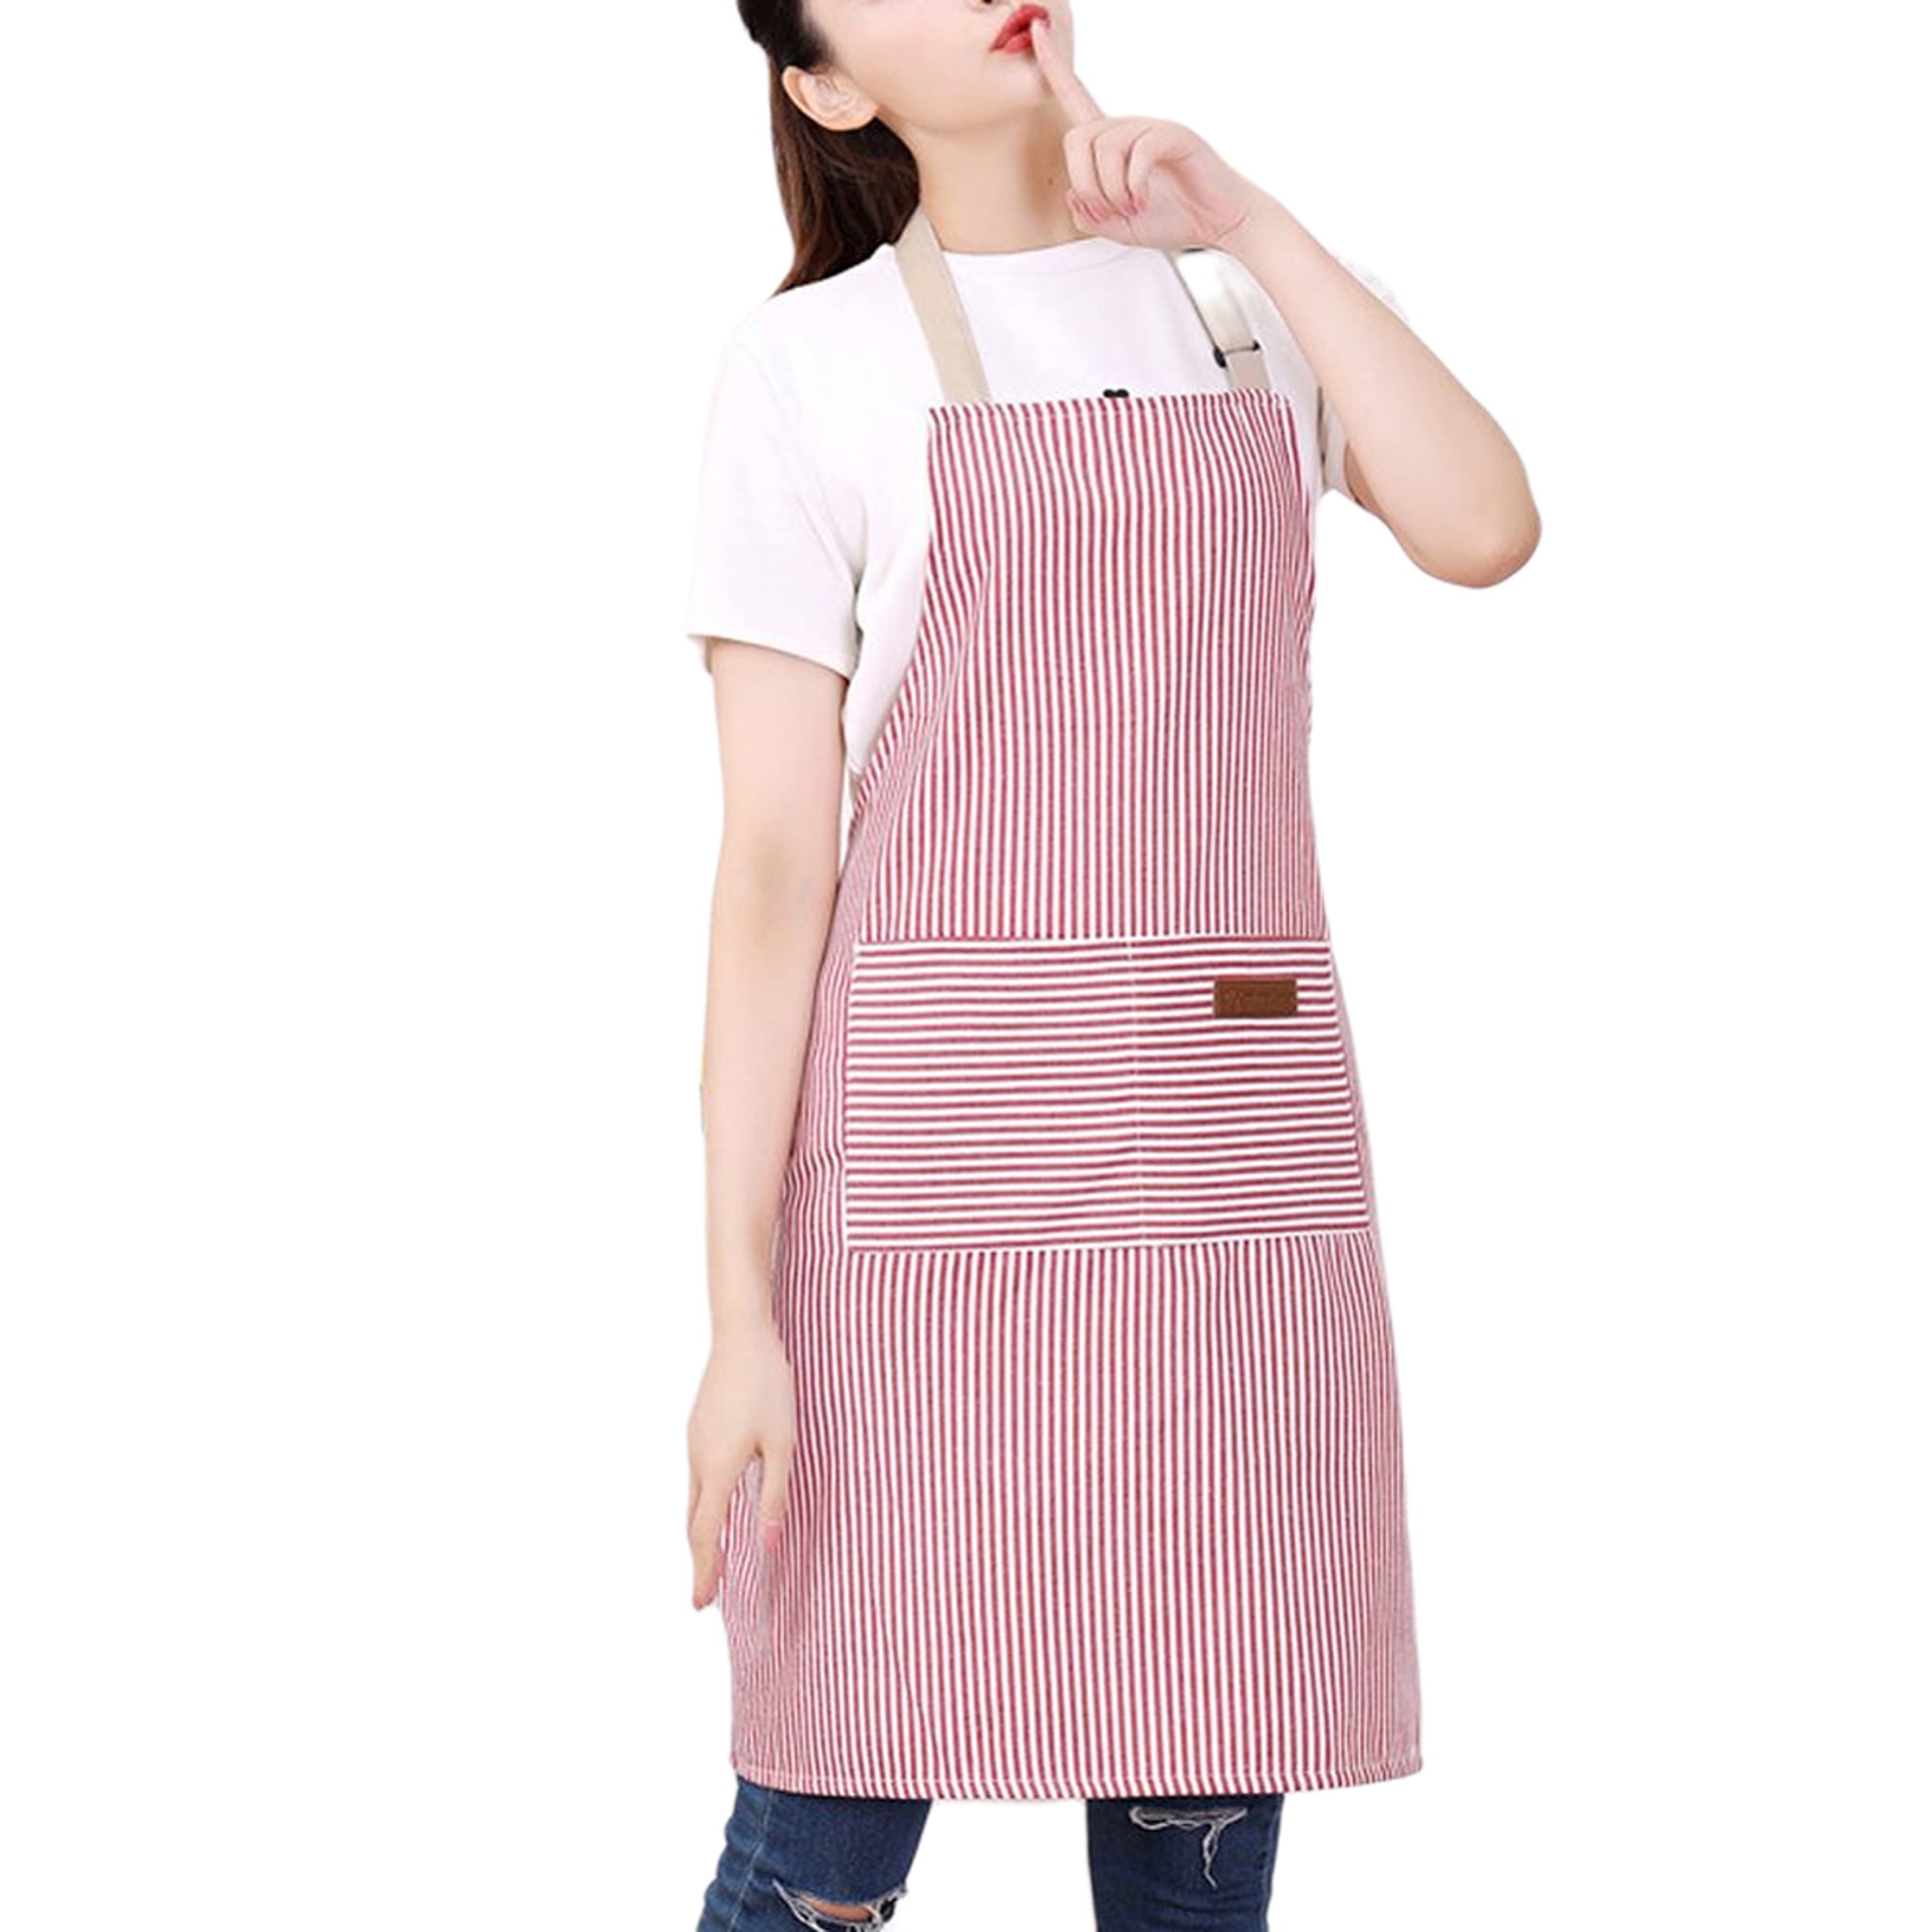 Apron Dress Animal Dinner Party Home Kitchen Cooking Womens Mens Adult Vest